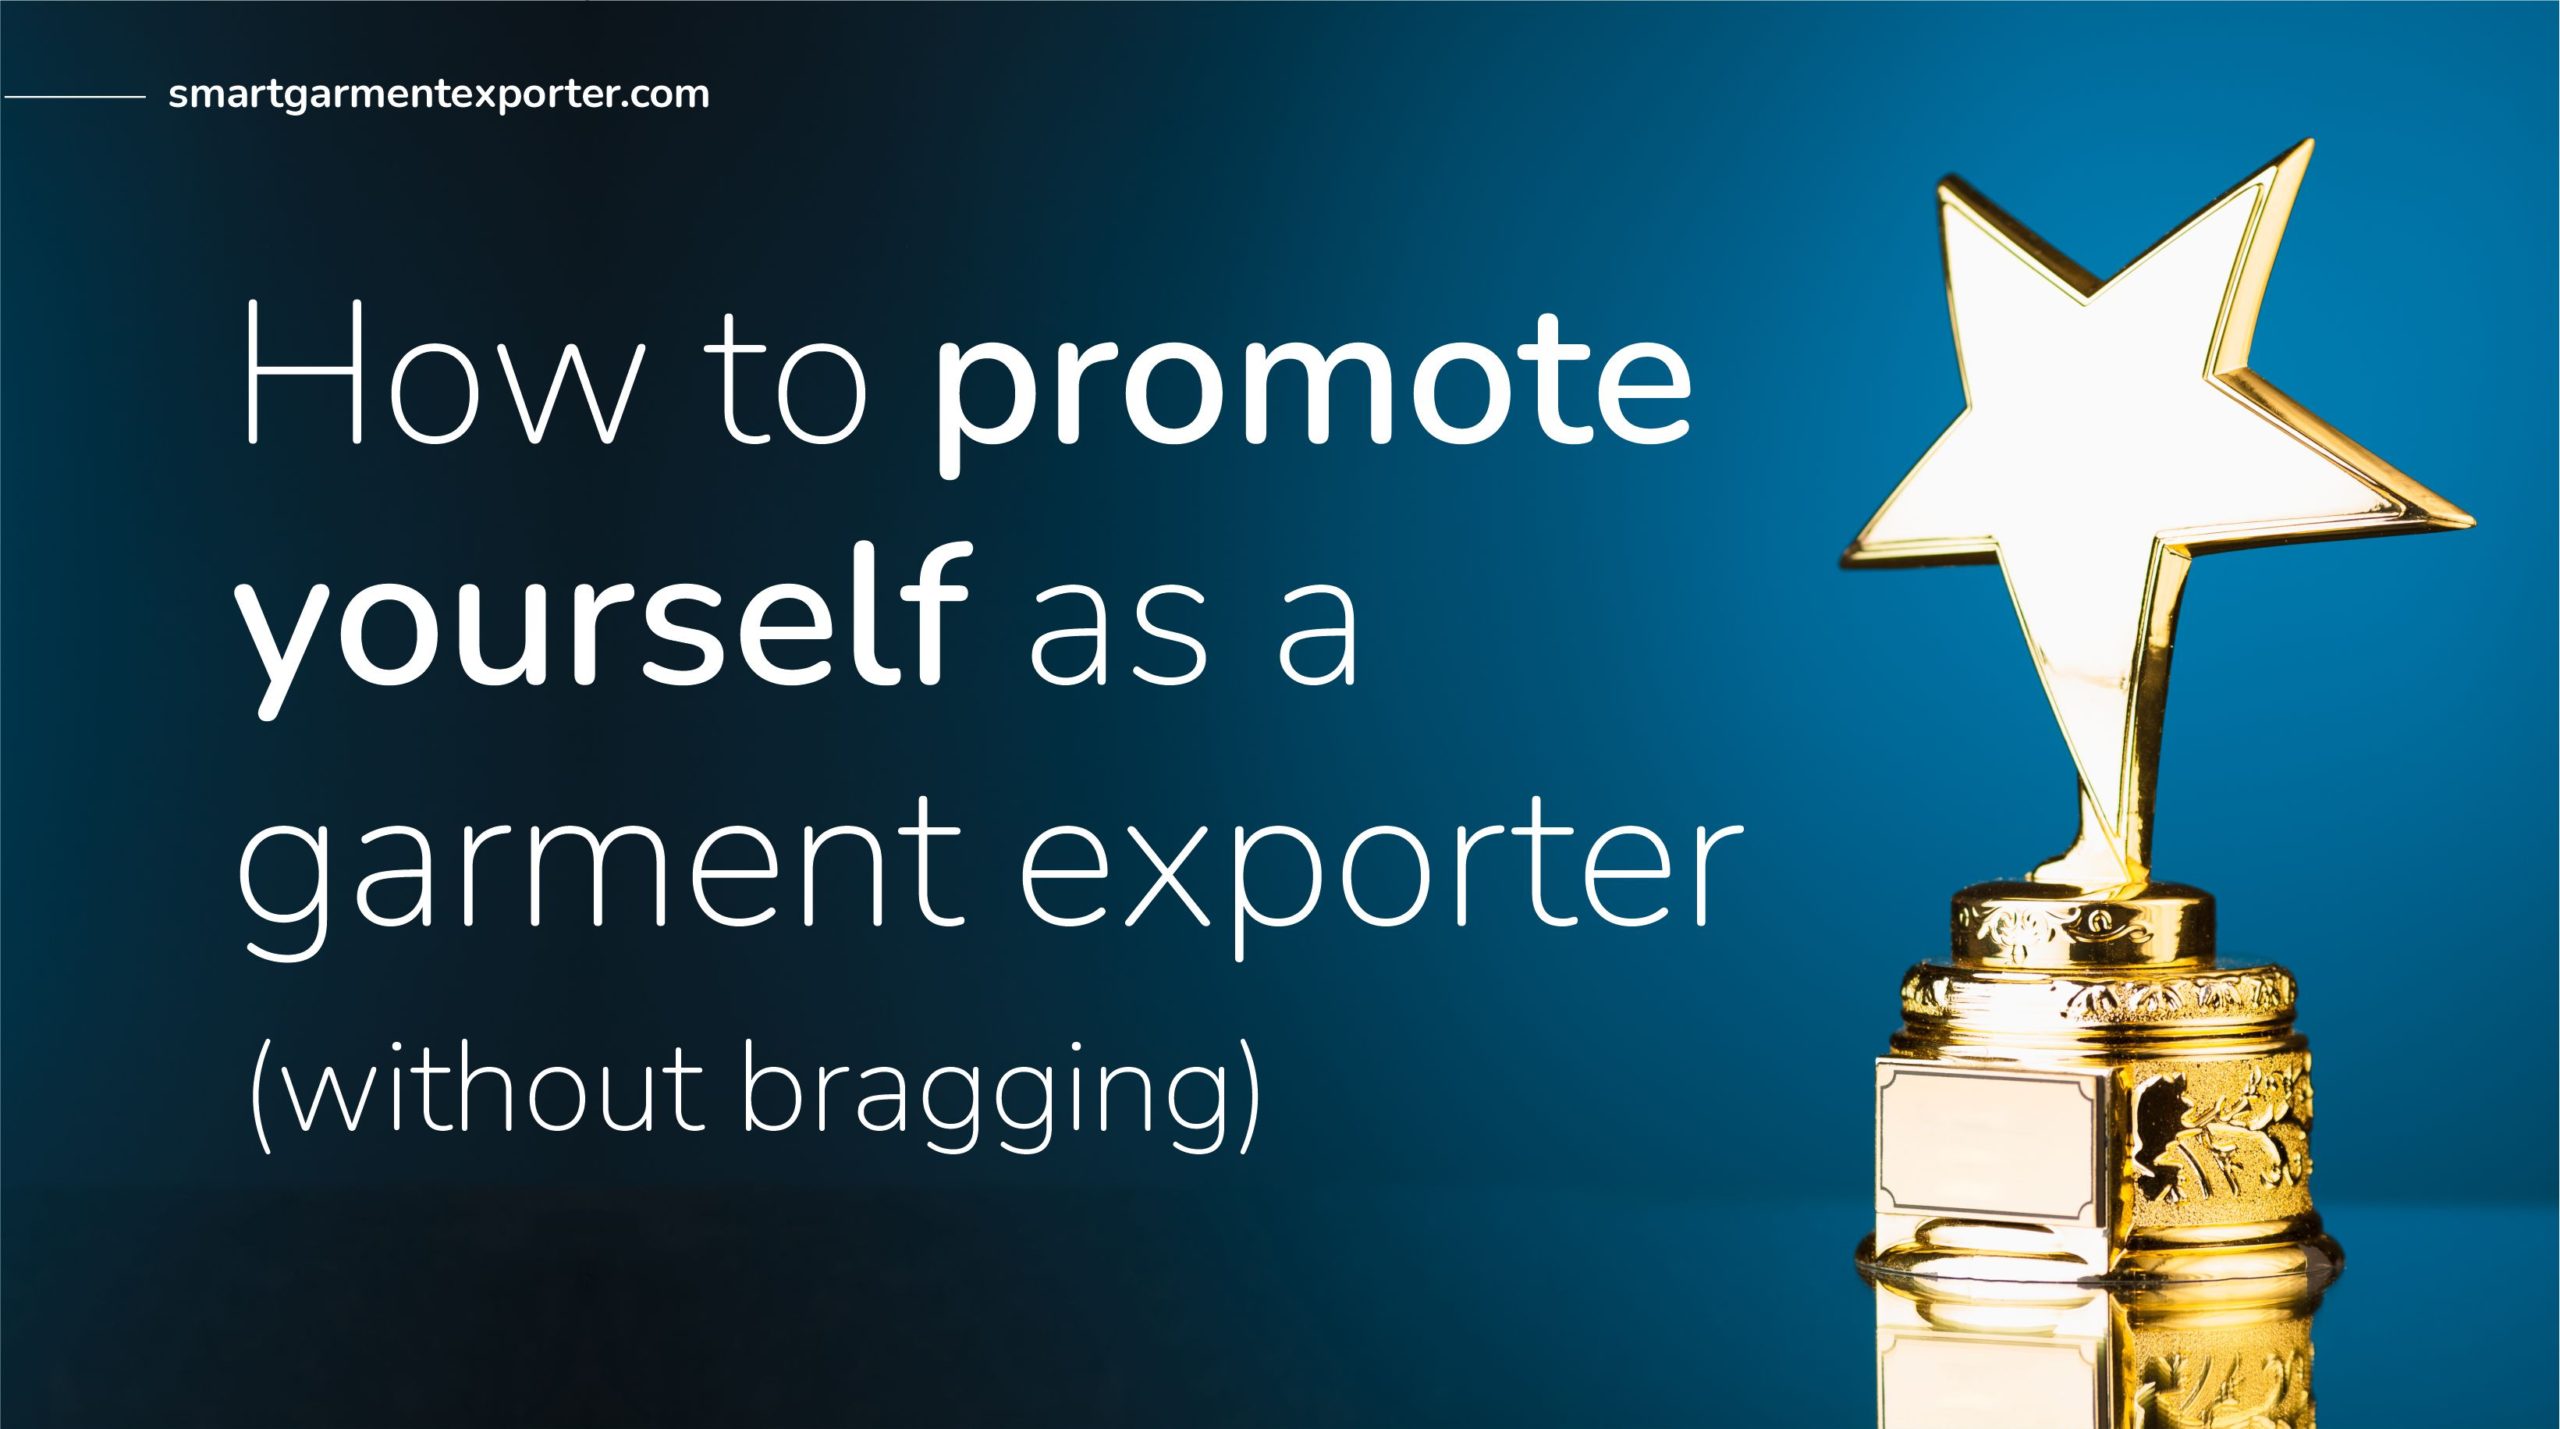 How to promote yourself as a garment exporter without bragging